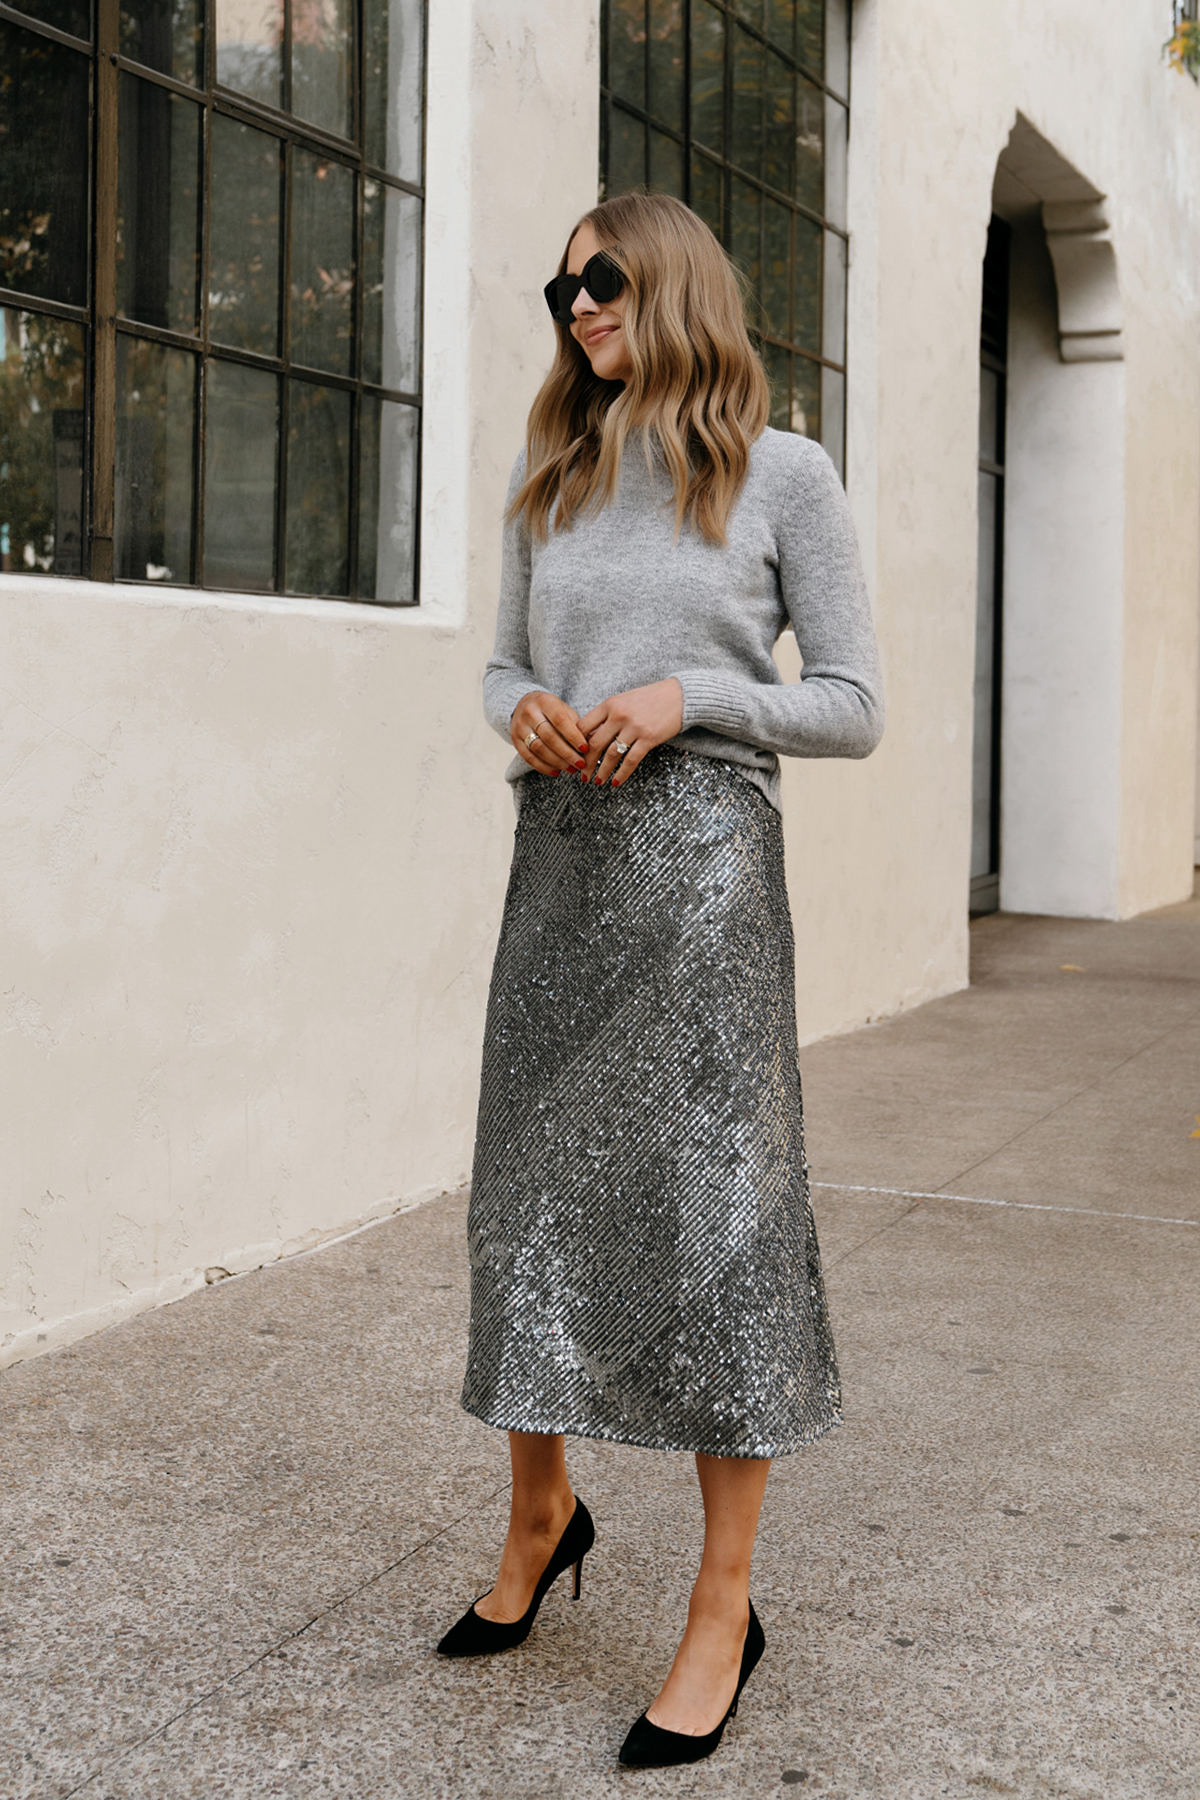 Fashion Jackson Wearing Ann Taylor Silver Sequin Skirt Outfit Grey Sweater Black Pumps Holiday Outfit 2